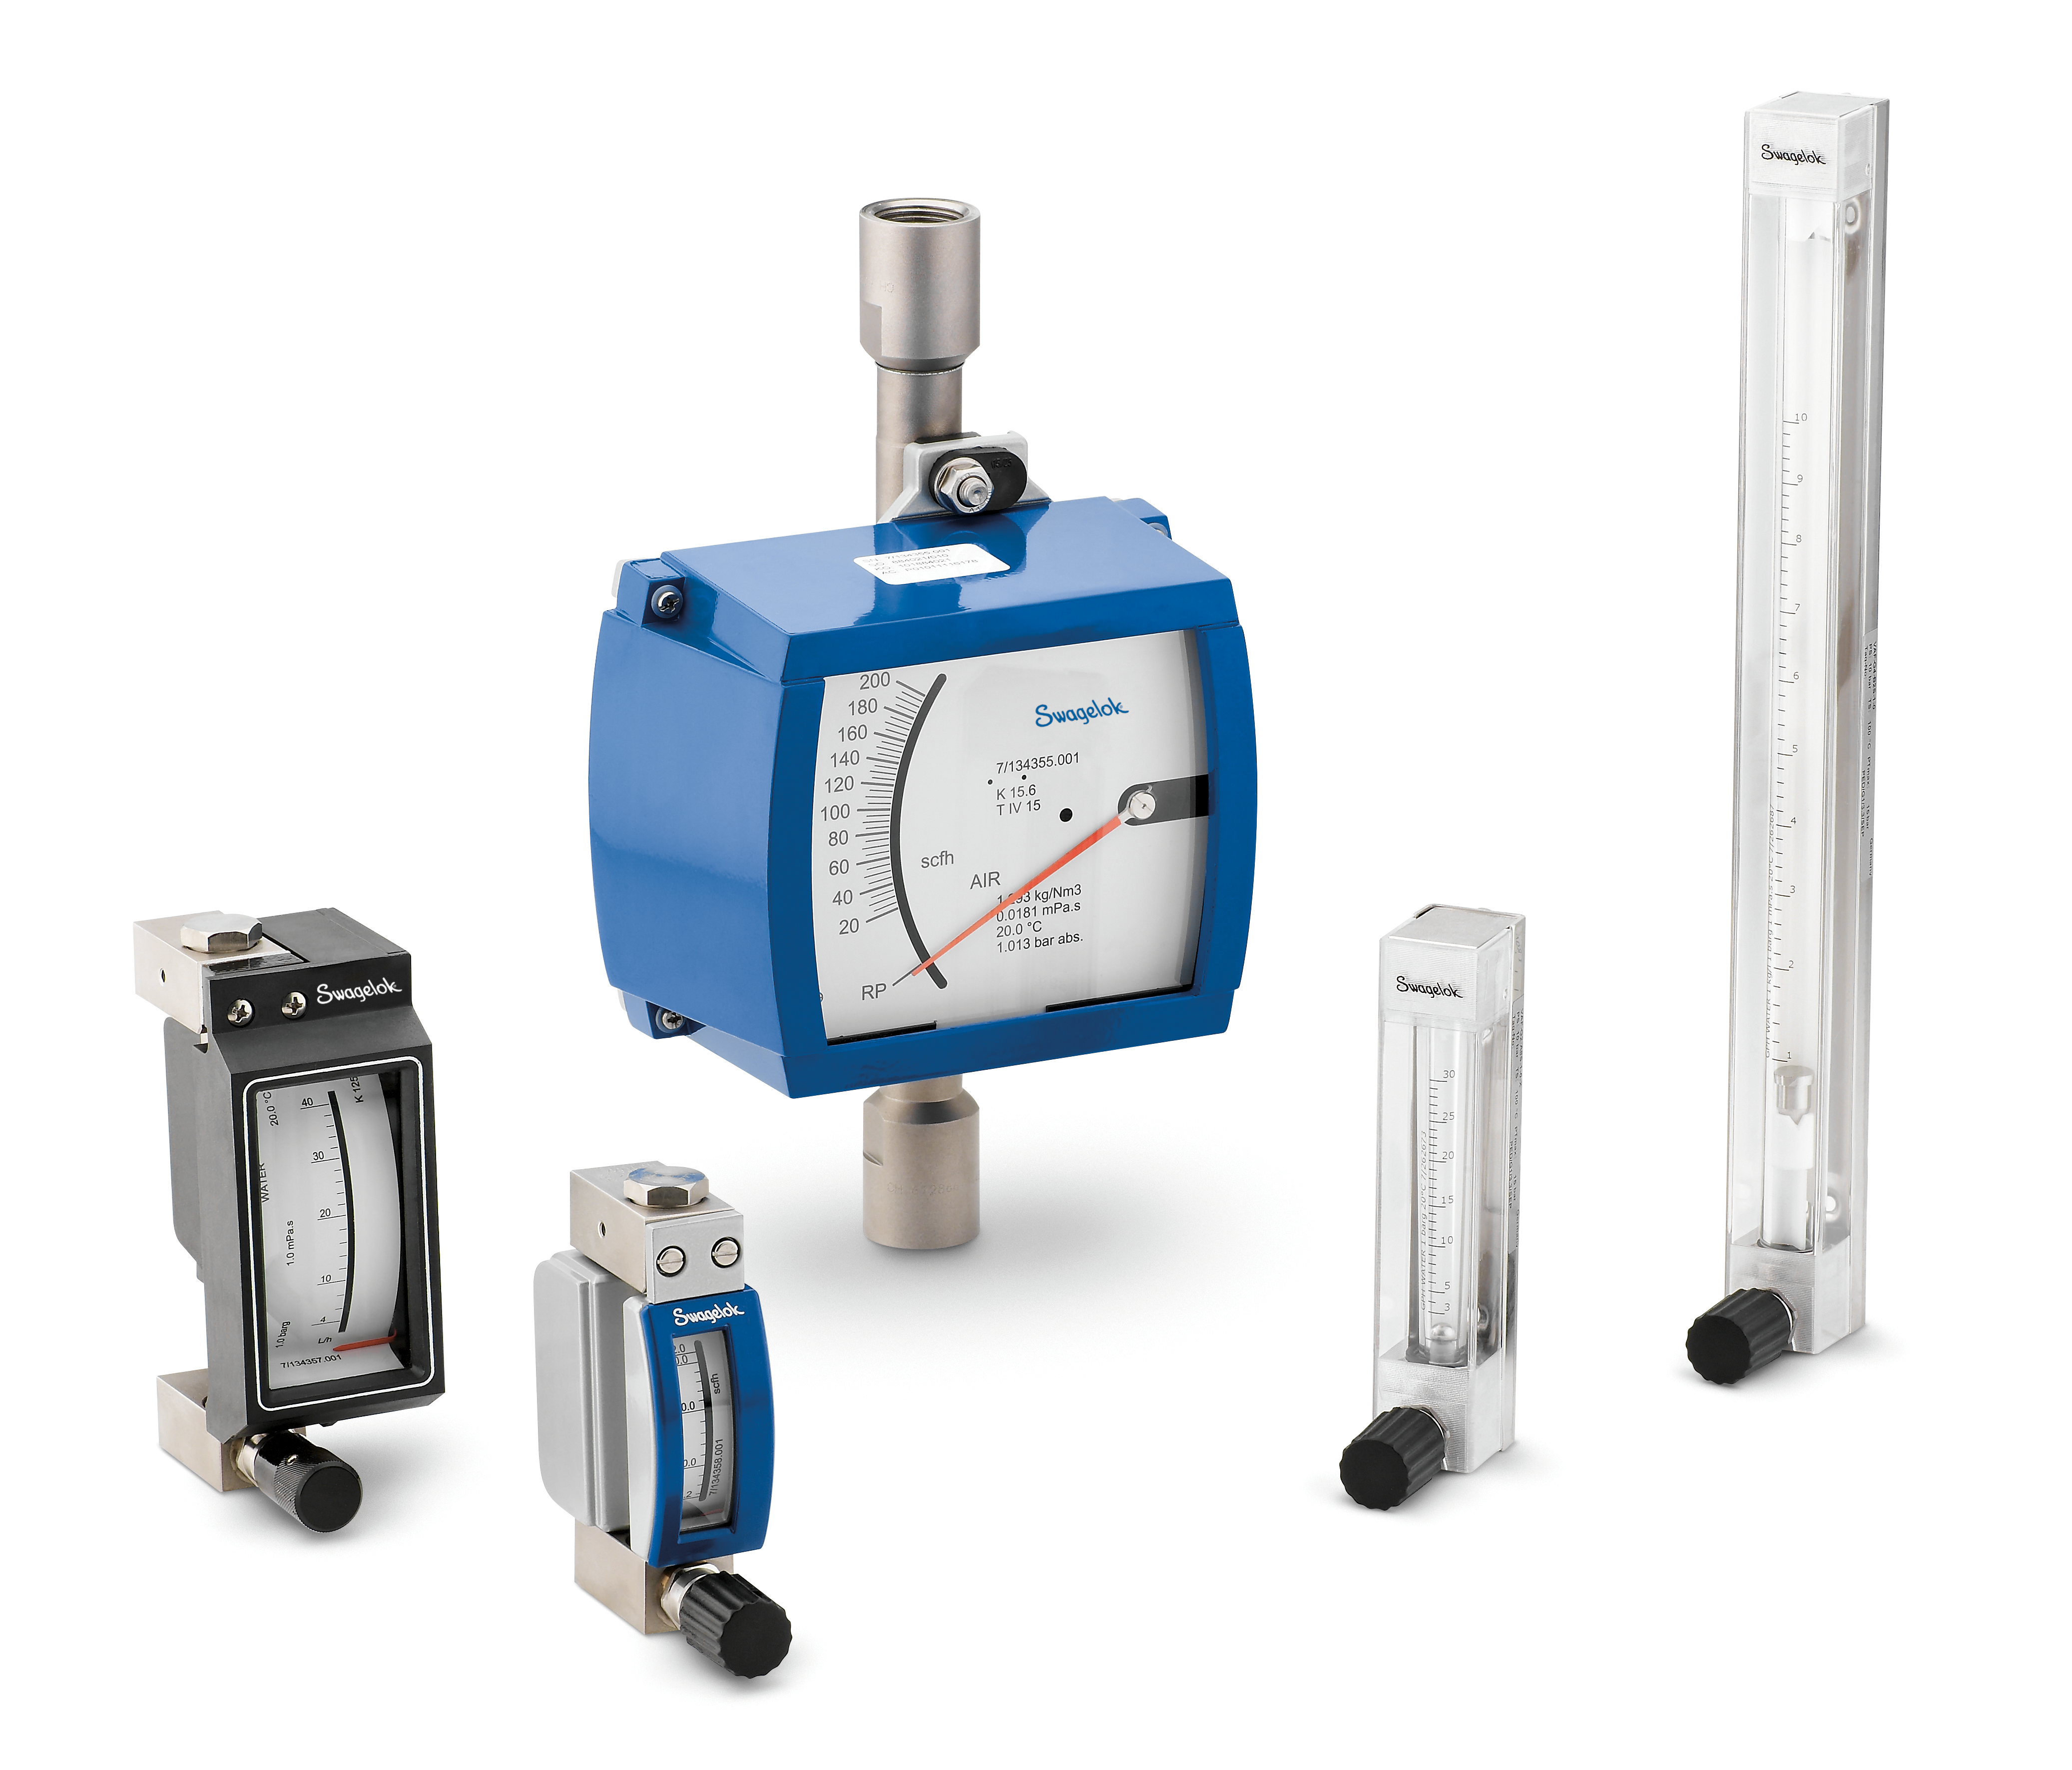 Six Questions to Ask about Swagelok Variable Area Flowmeters